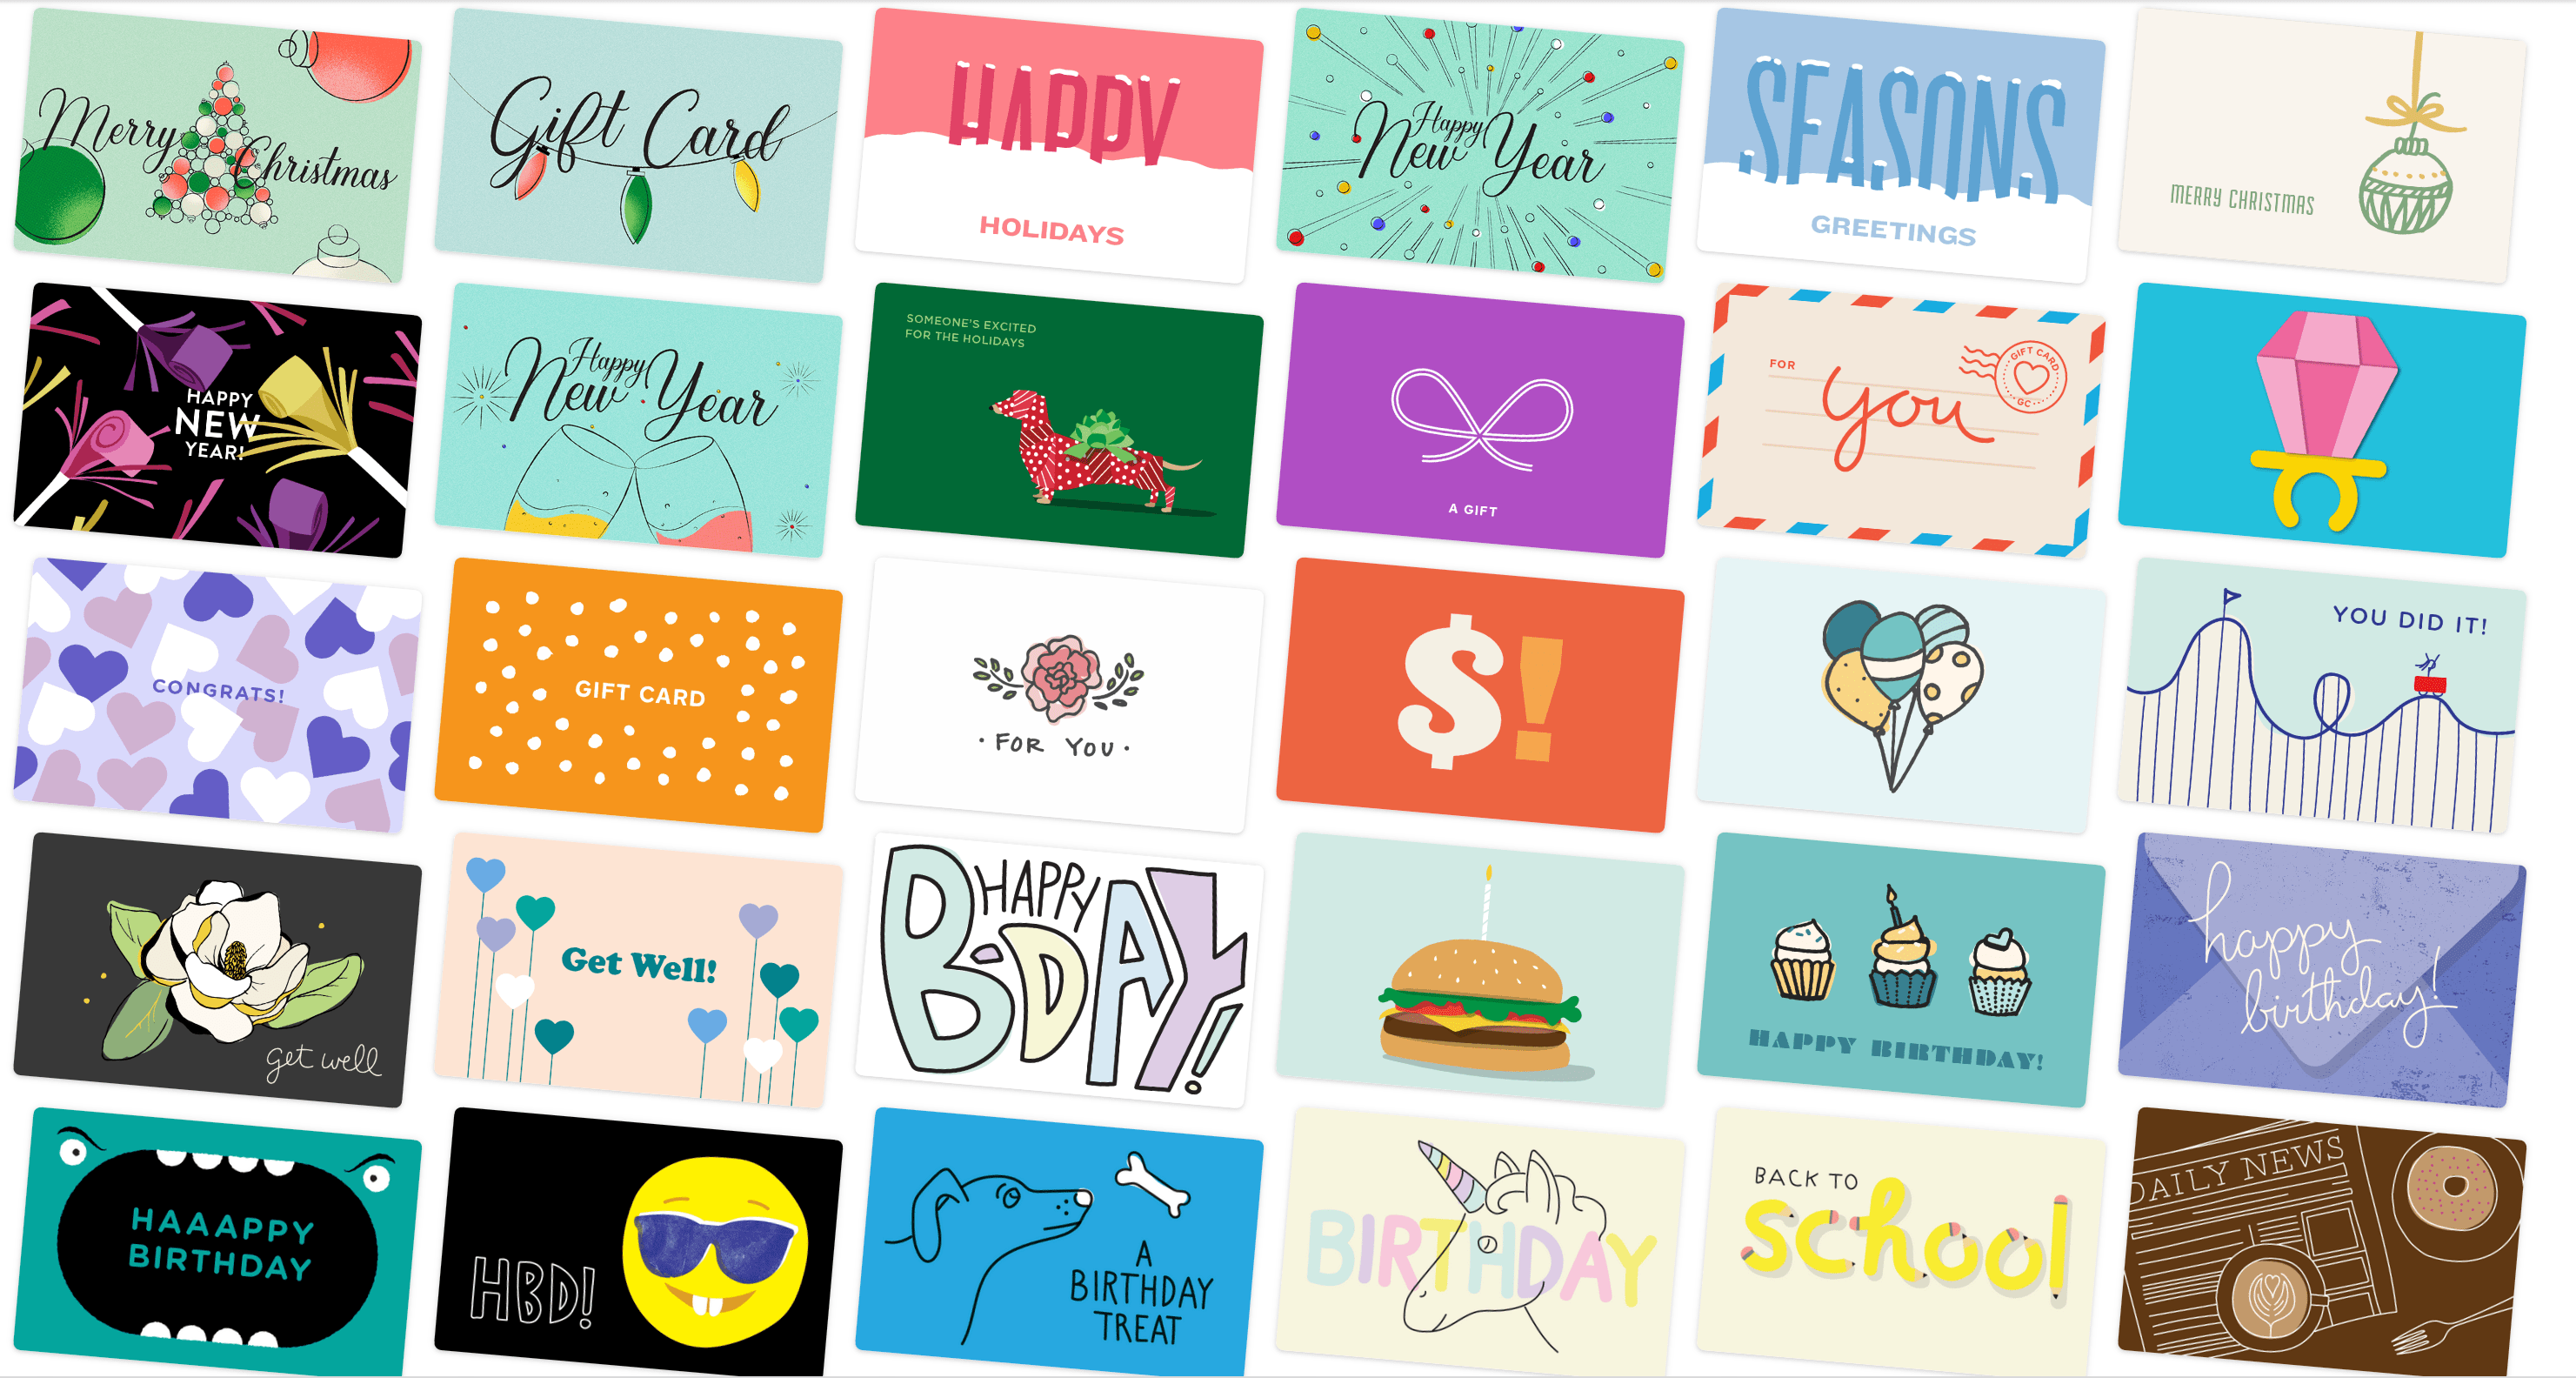 Gift cards in a collage.